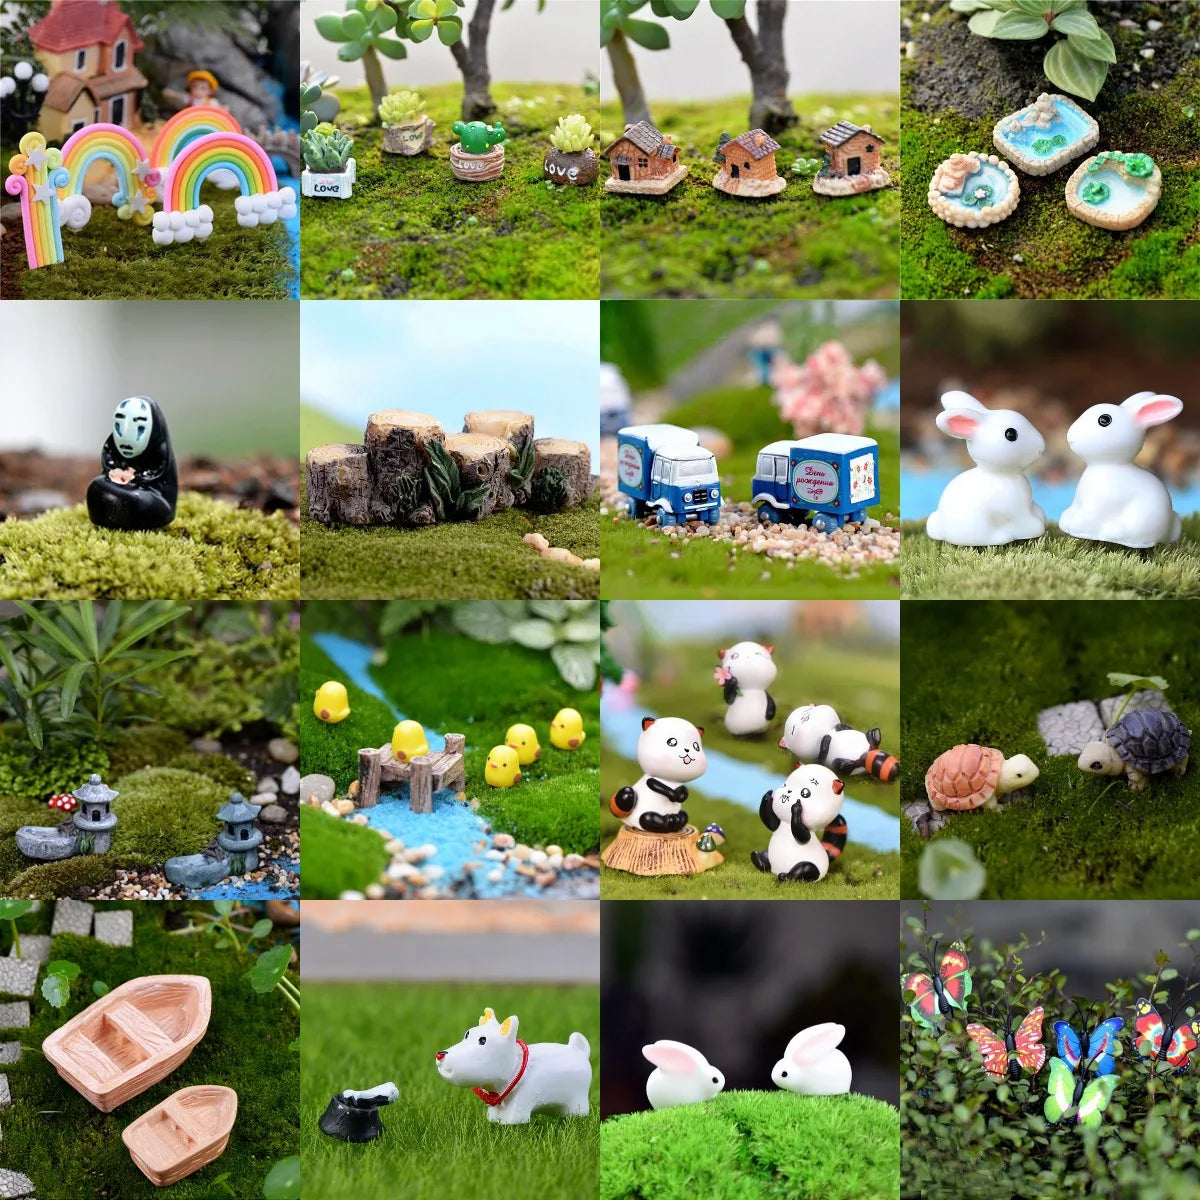 Mini Cute Animal Figurines and Miniature Houses: Adorable Crafts